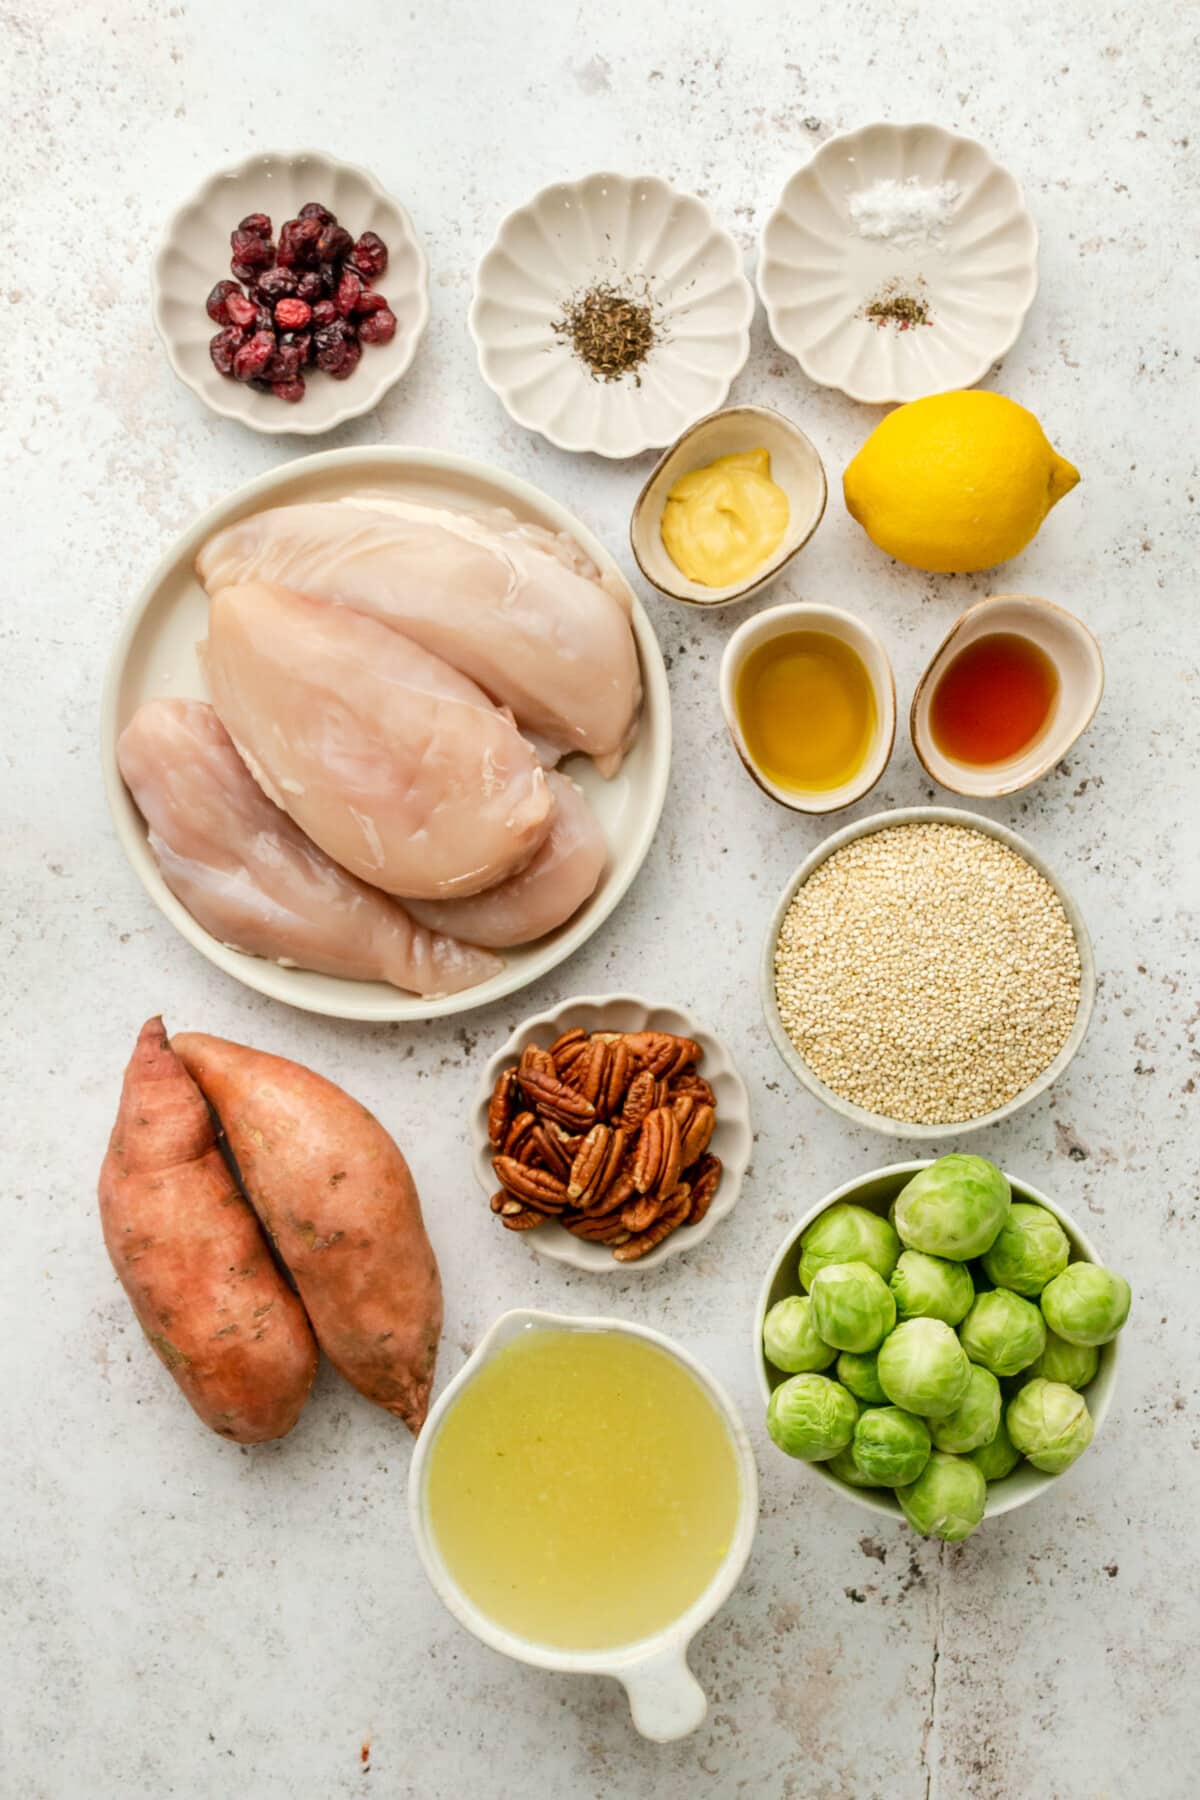 Ingredients for harvest quinoa bowls with chicken and sweet potatoes sit in a variety of bowls and plates on a light grey surface.